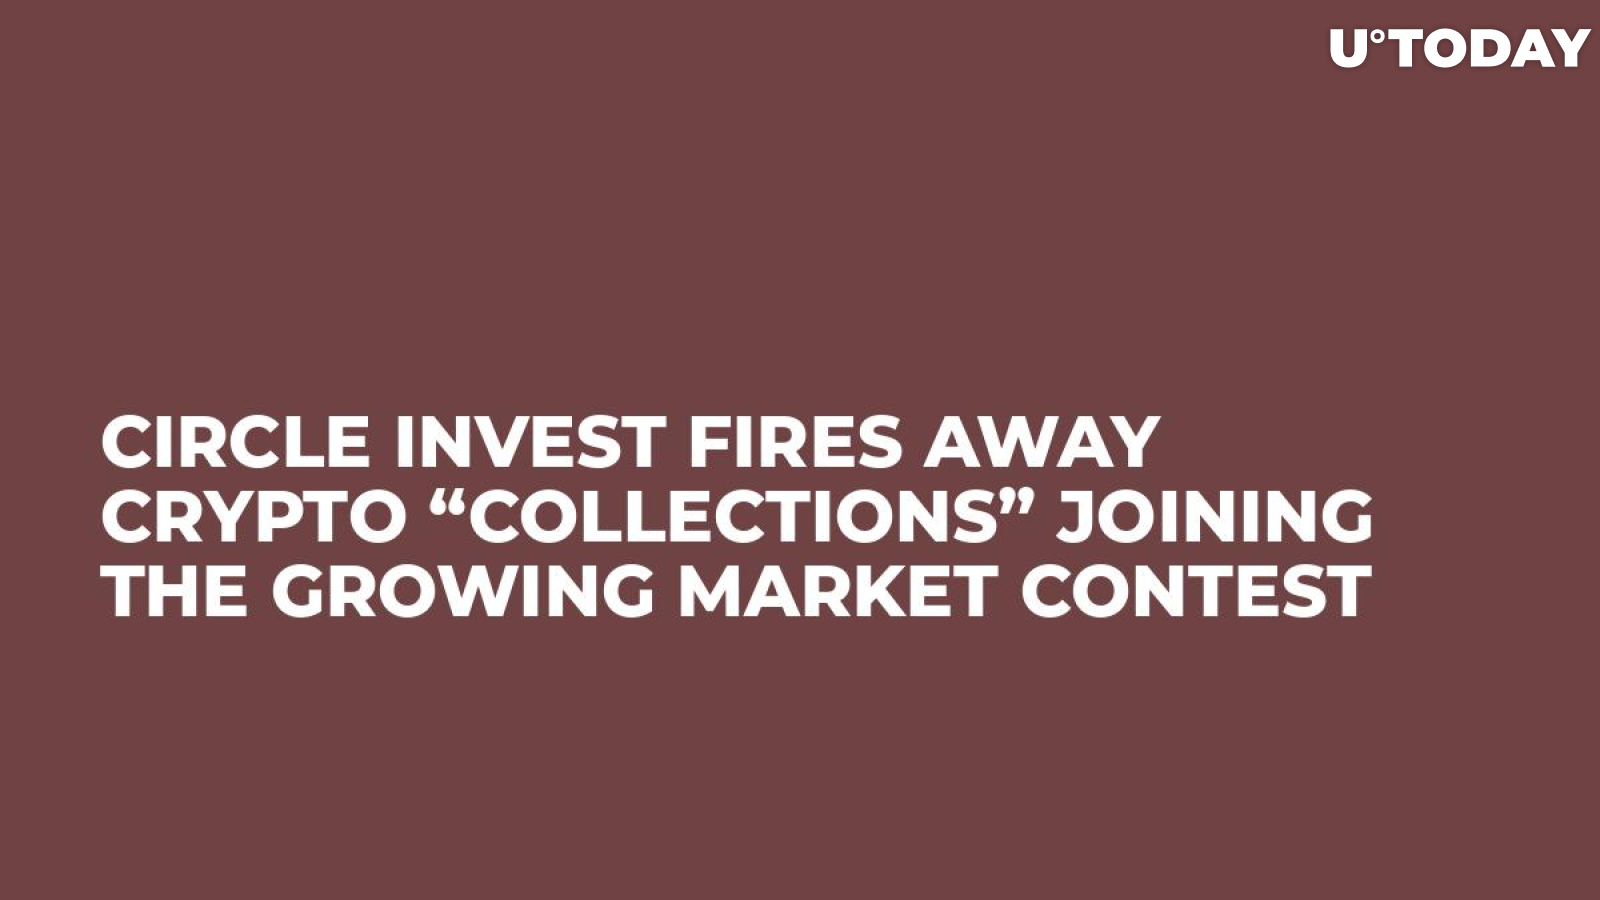 Circle Invest Fires Away Crypto “Collections” Joining the Growing Market Contest